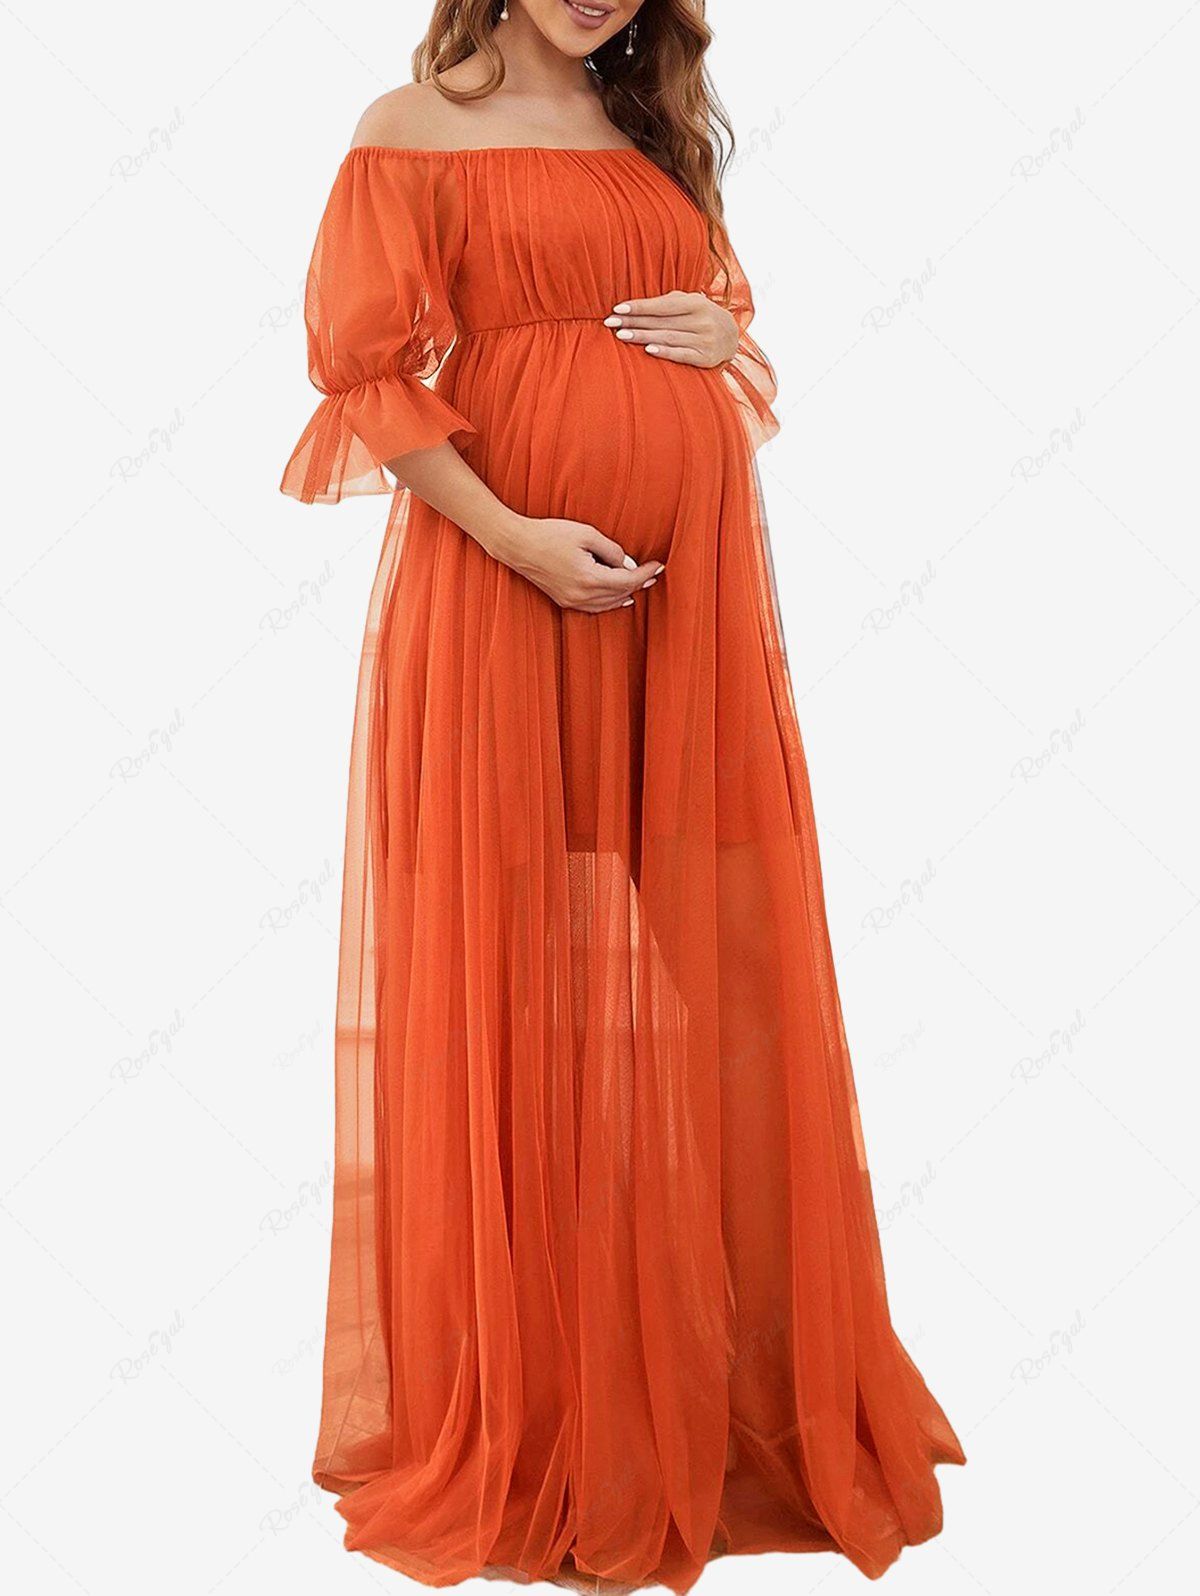 Hot Plus Size Sheer Mesh Layered Ruched Ruffles Sleeve Off The Shoulder Maternity Dress  